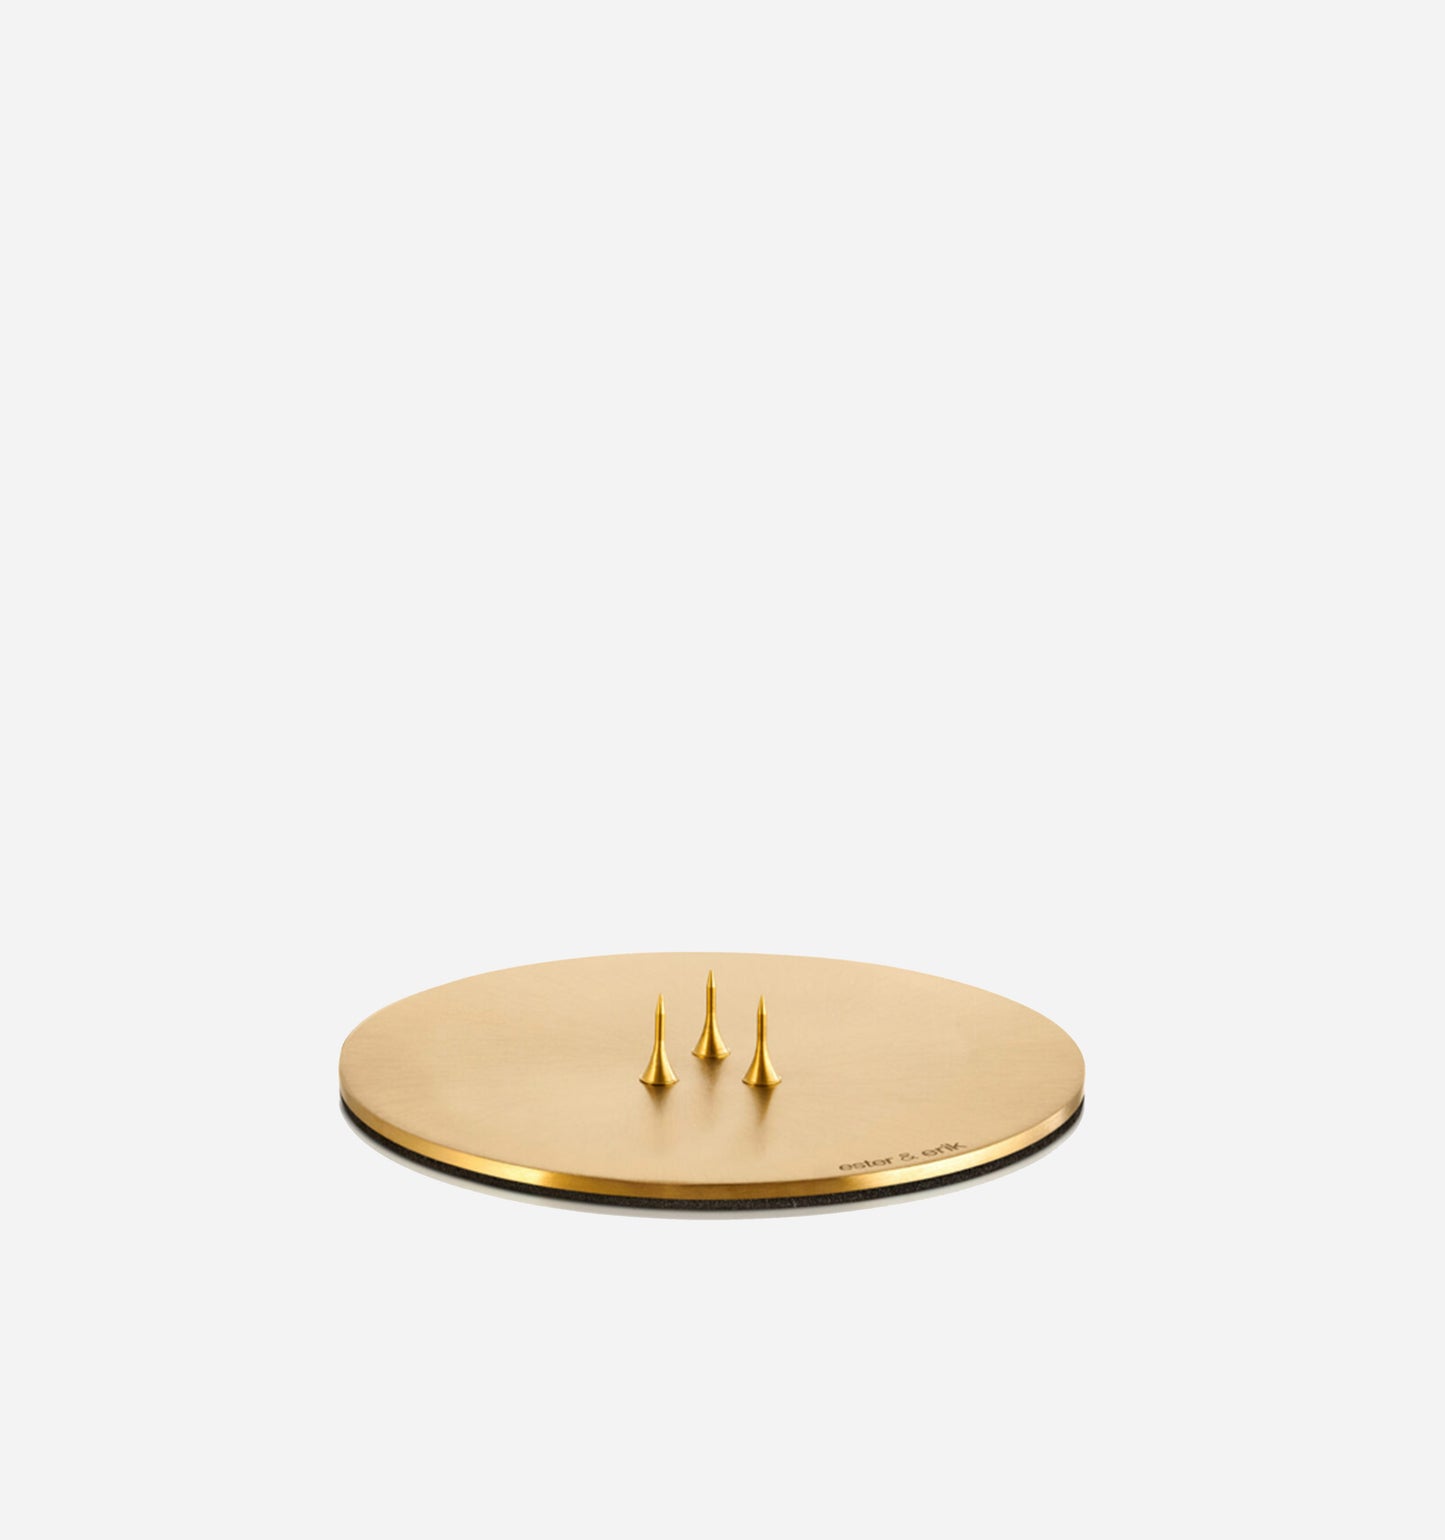 Candle Plate in Matte Gold